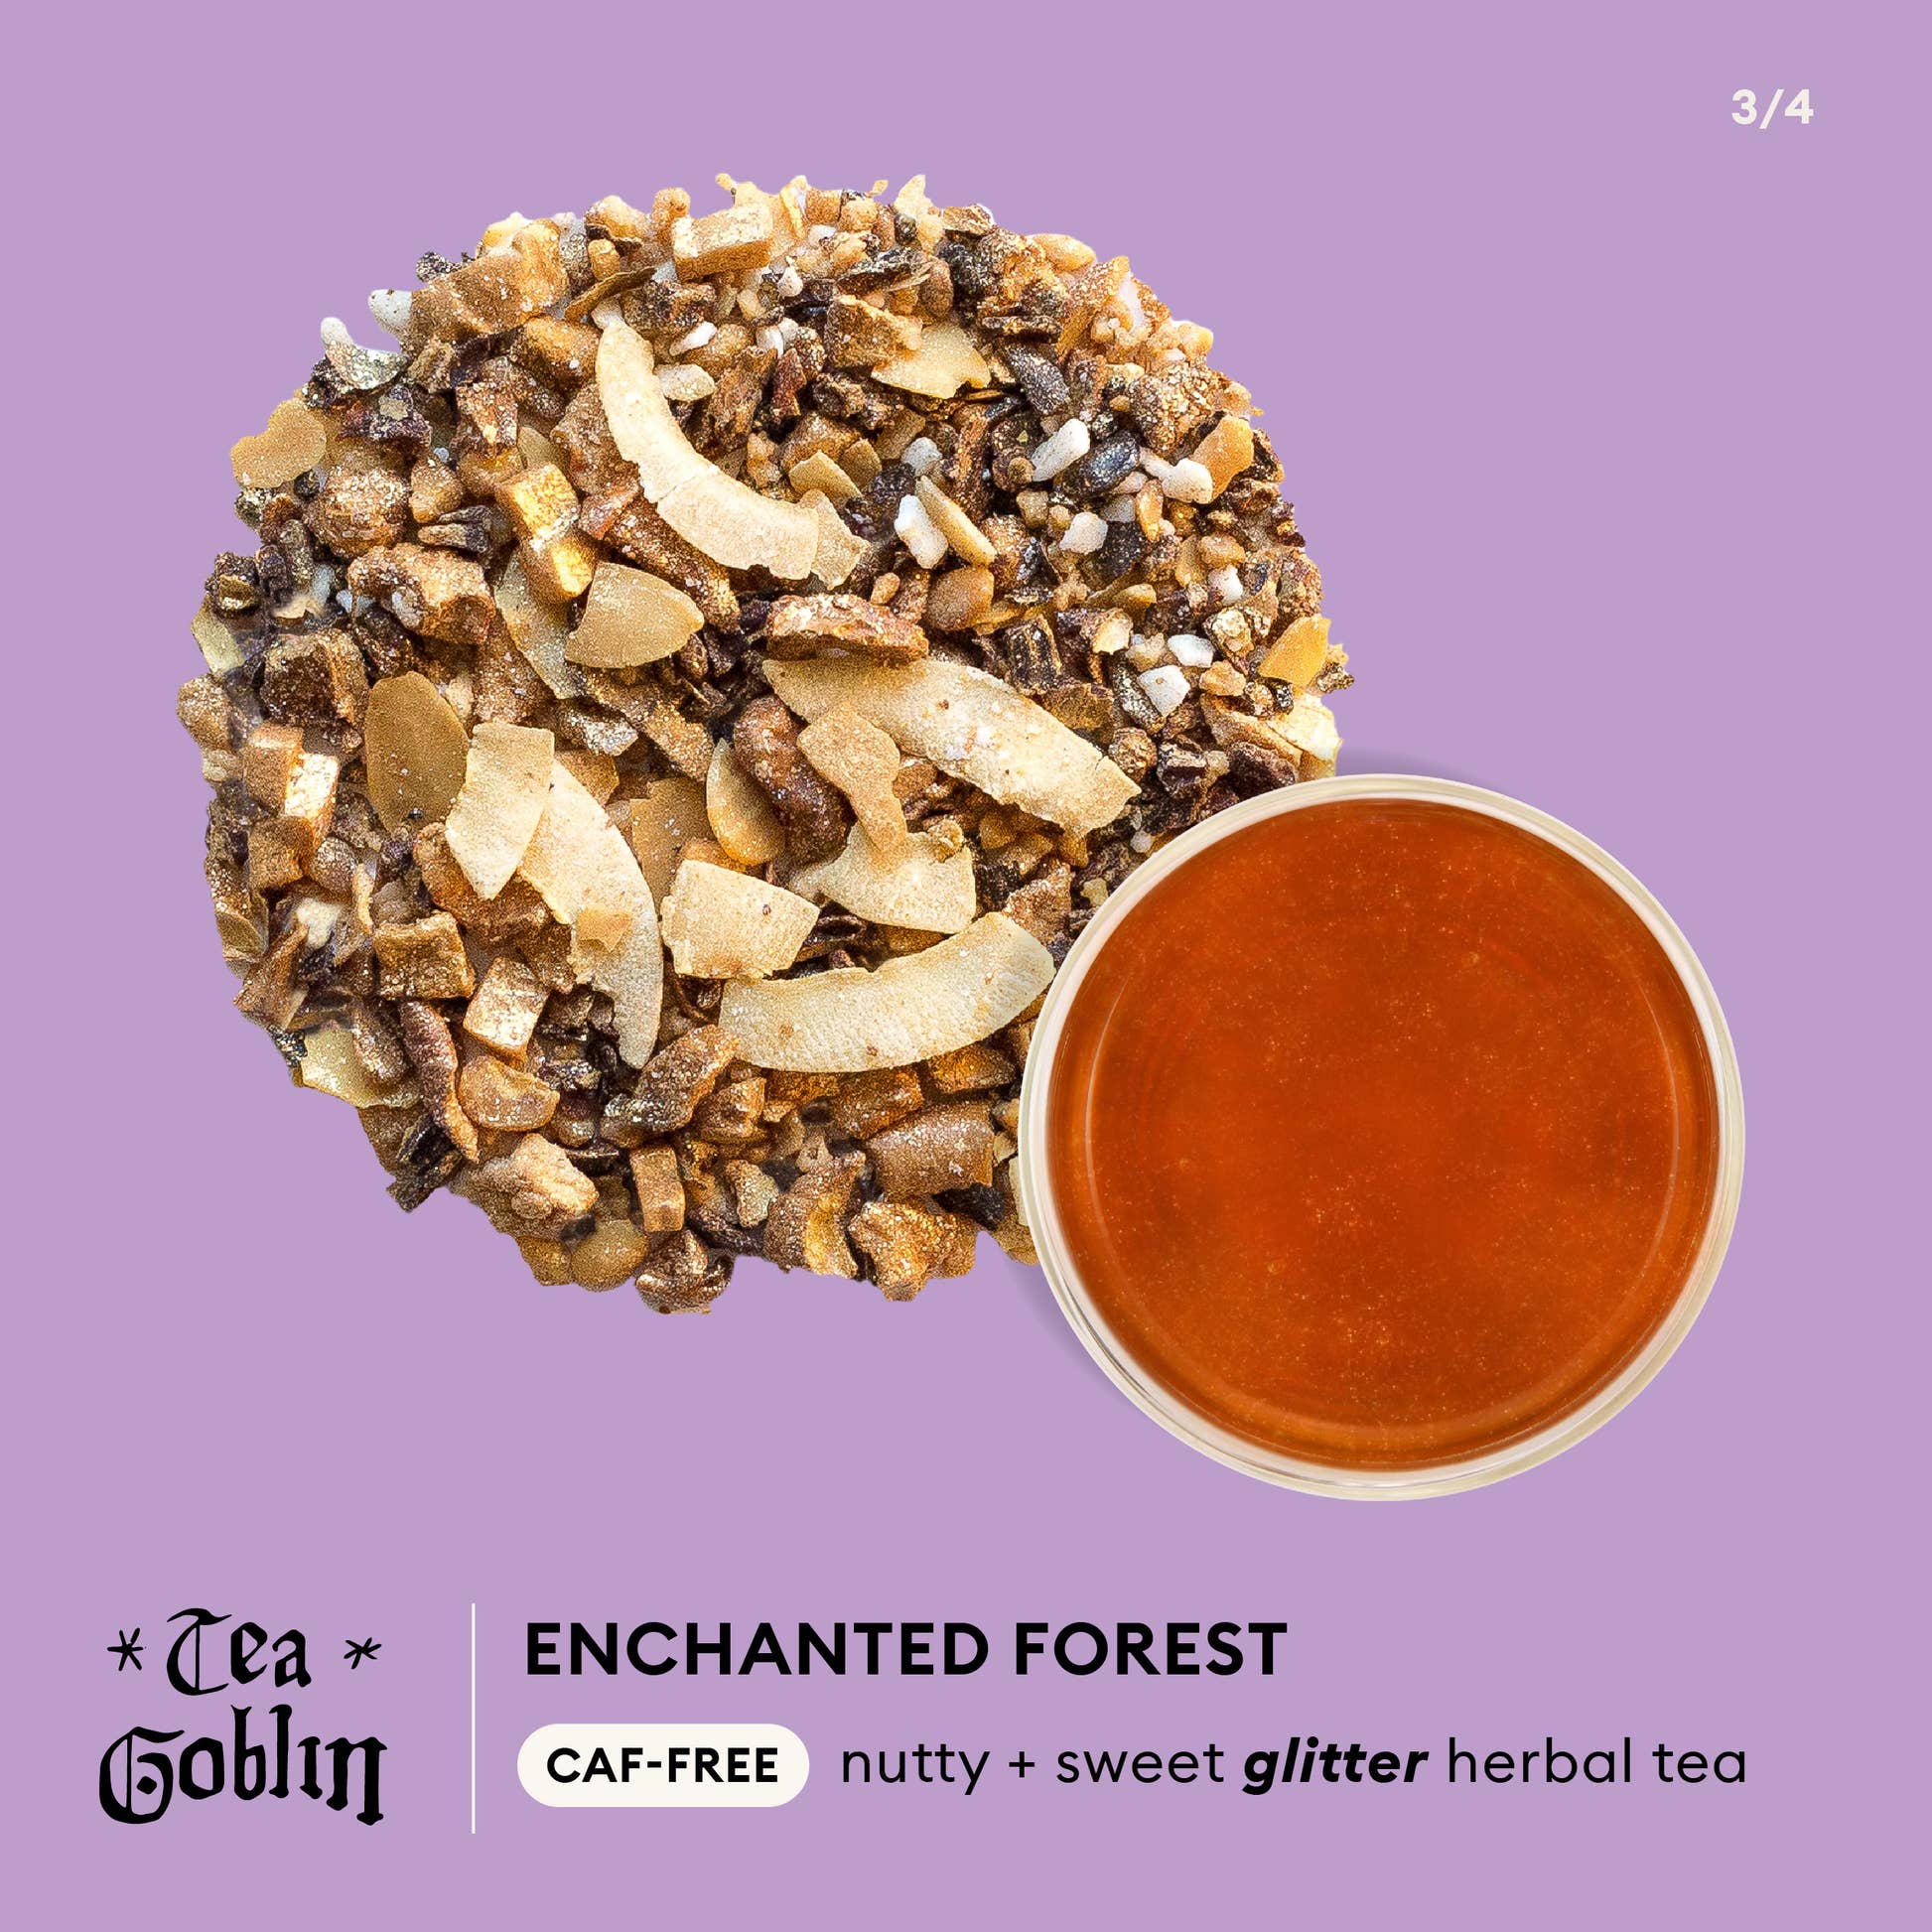 Tea Goblin - Enchanted Forest caf-free, sweet + nutty glitter tea infographic